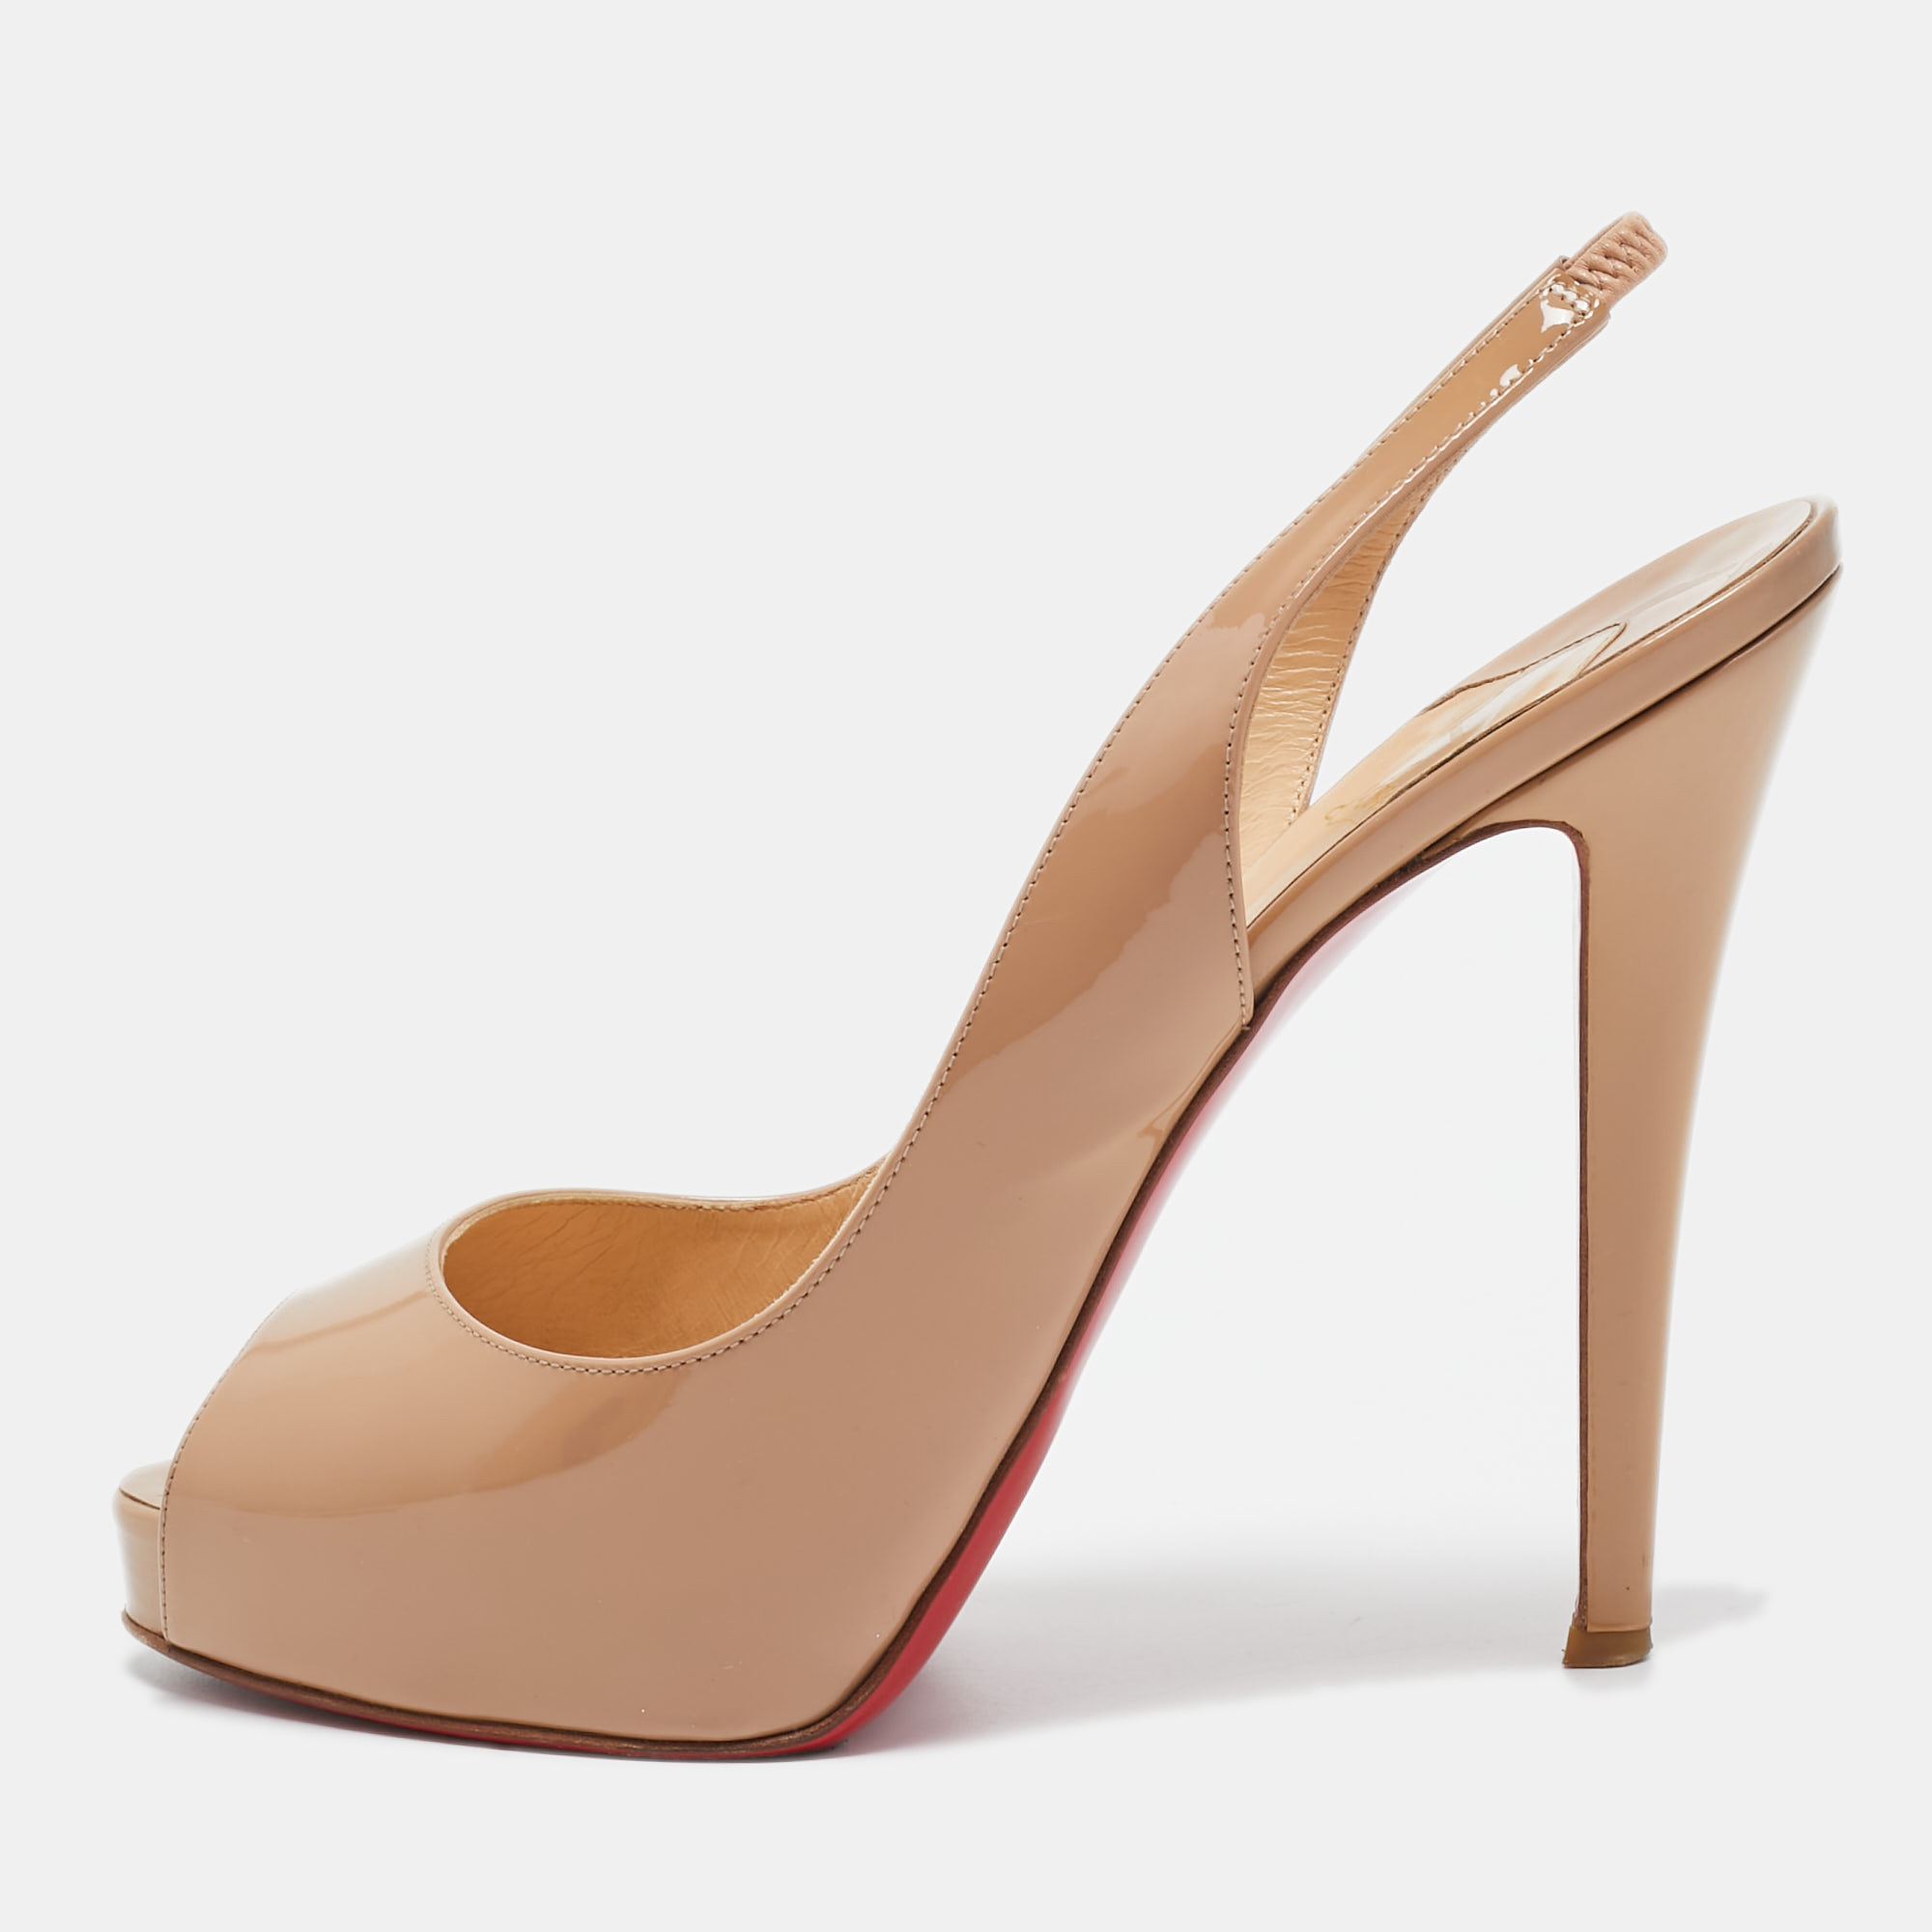 Christian Louboutin Beige Patent Leather No Prive Slingback Pumps Size 41